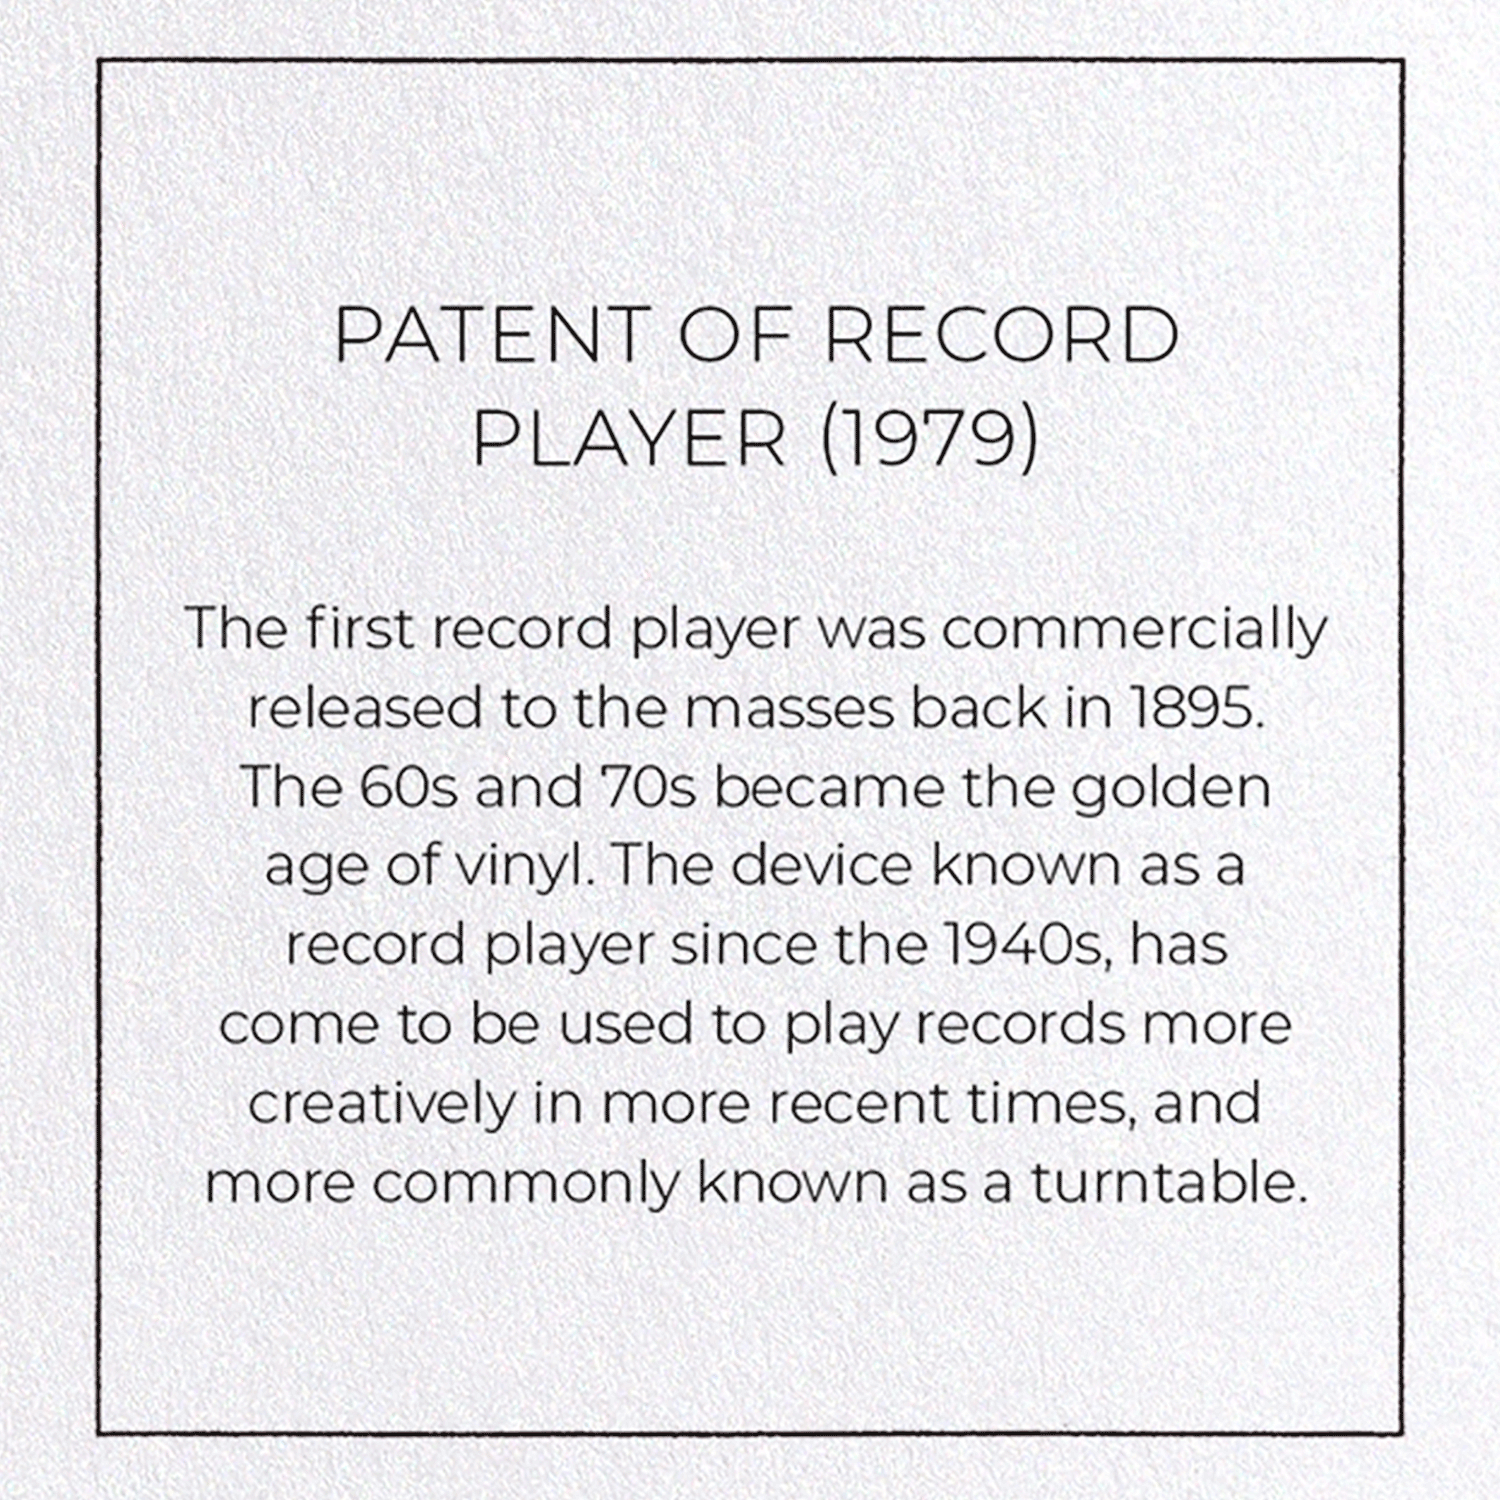 PATENT OF RECORD PLAYER (1979)